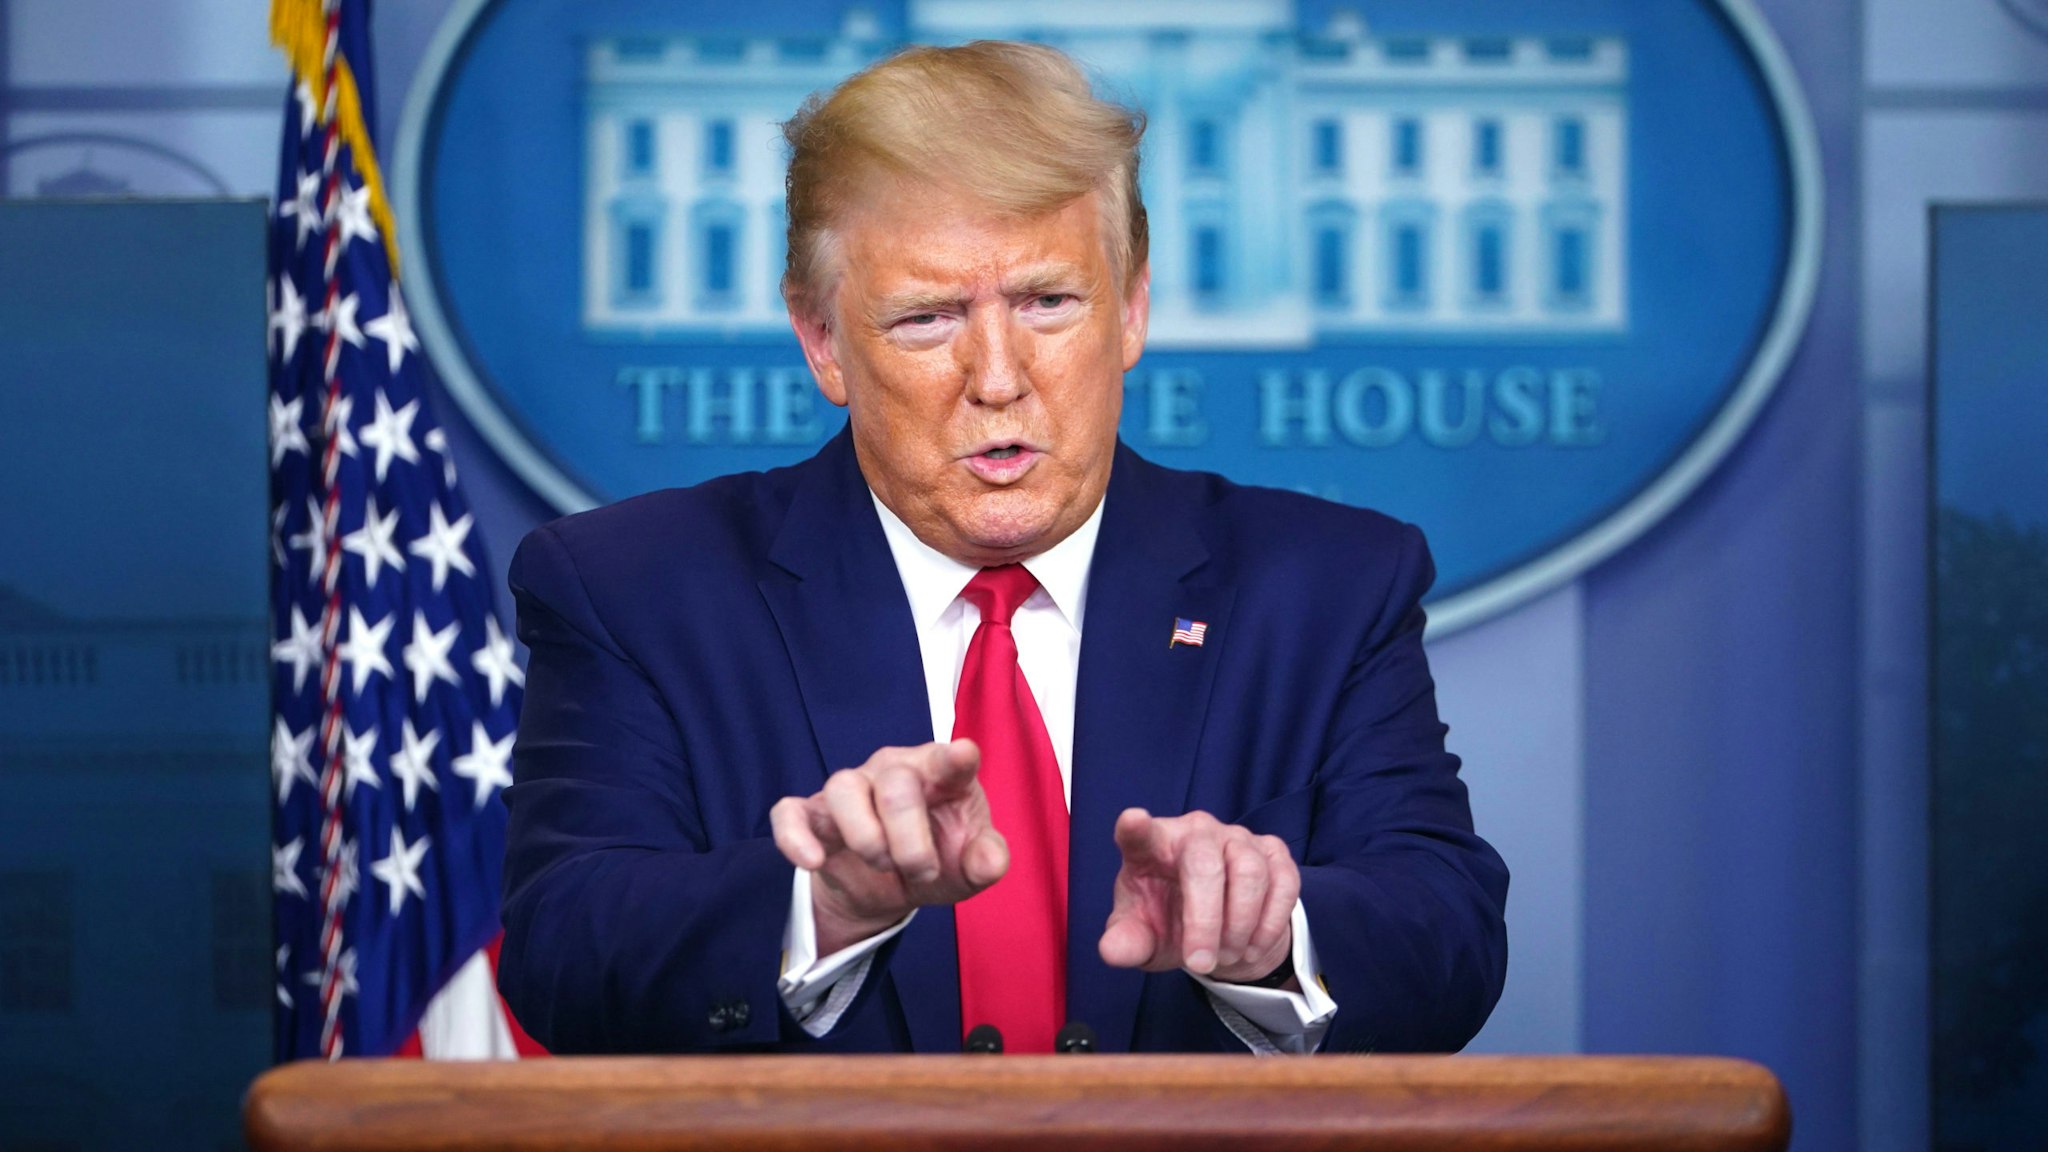 US President Donald Trump speaks during the daily briefing on the novel coronavirus, COVID-19, in the Brady Briefing Room at the White House on April 6, 2020, in Washington, DC.